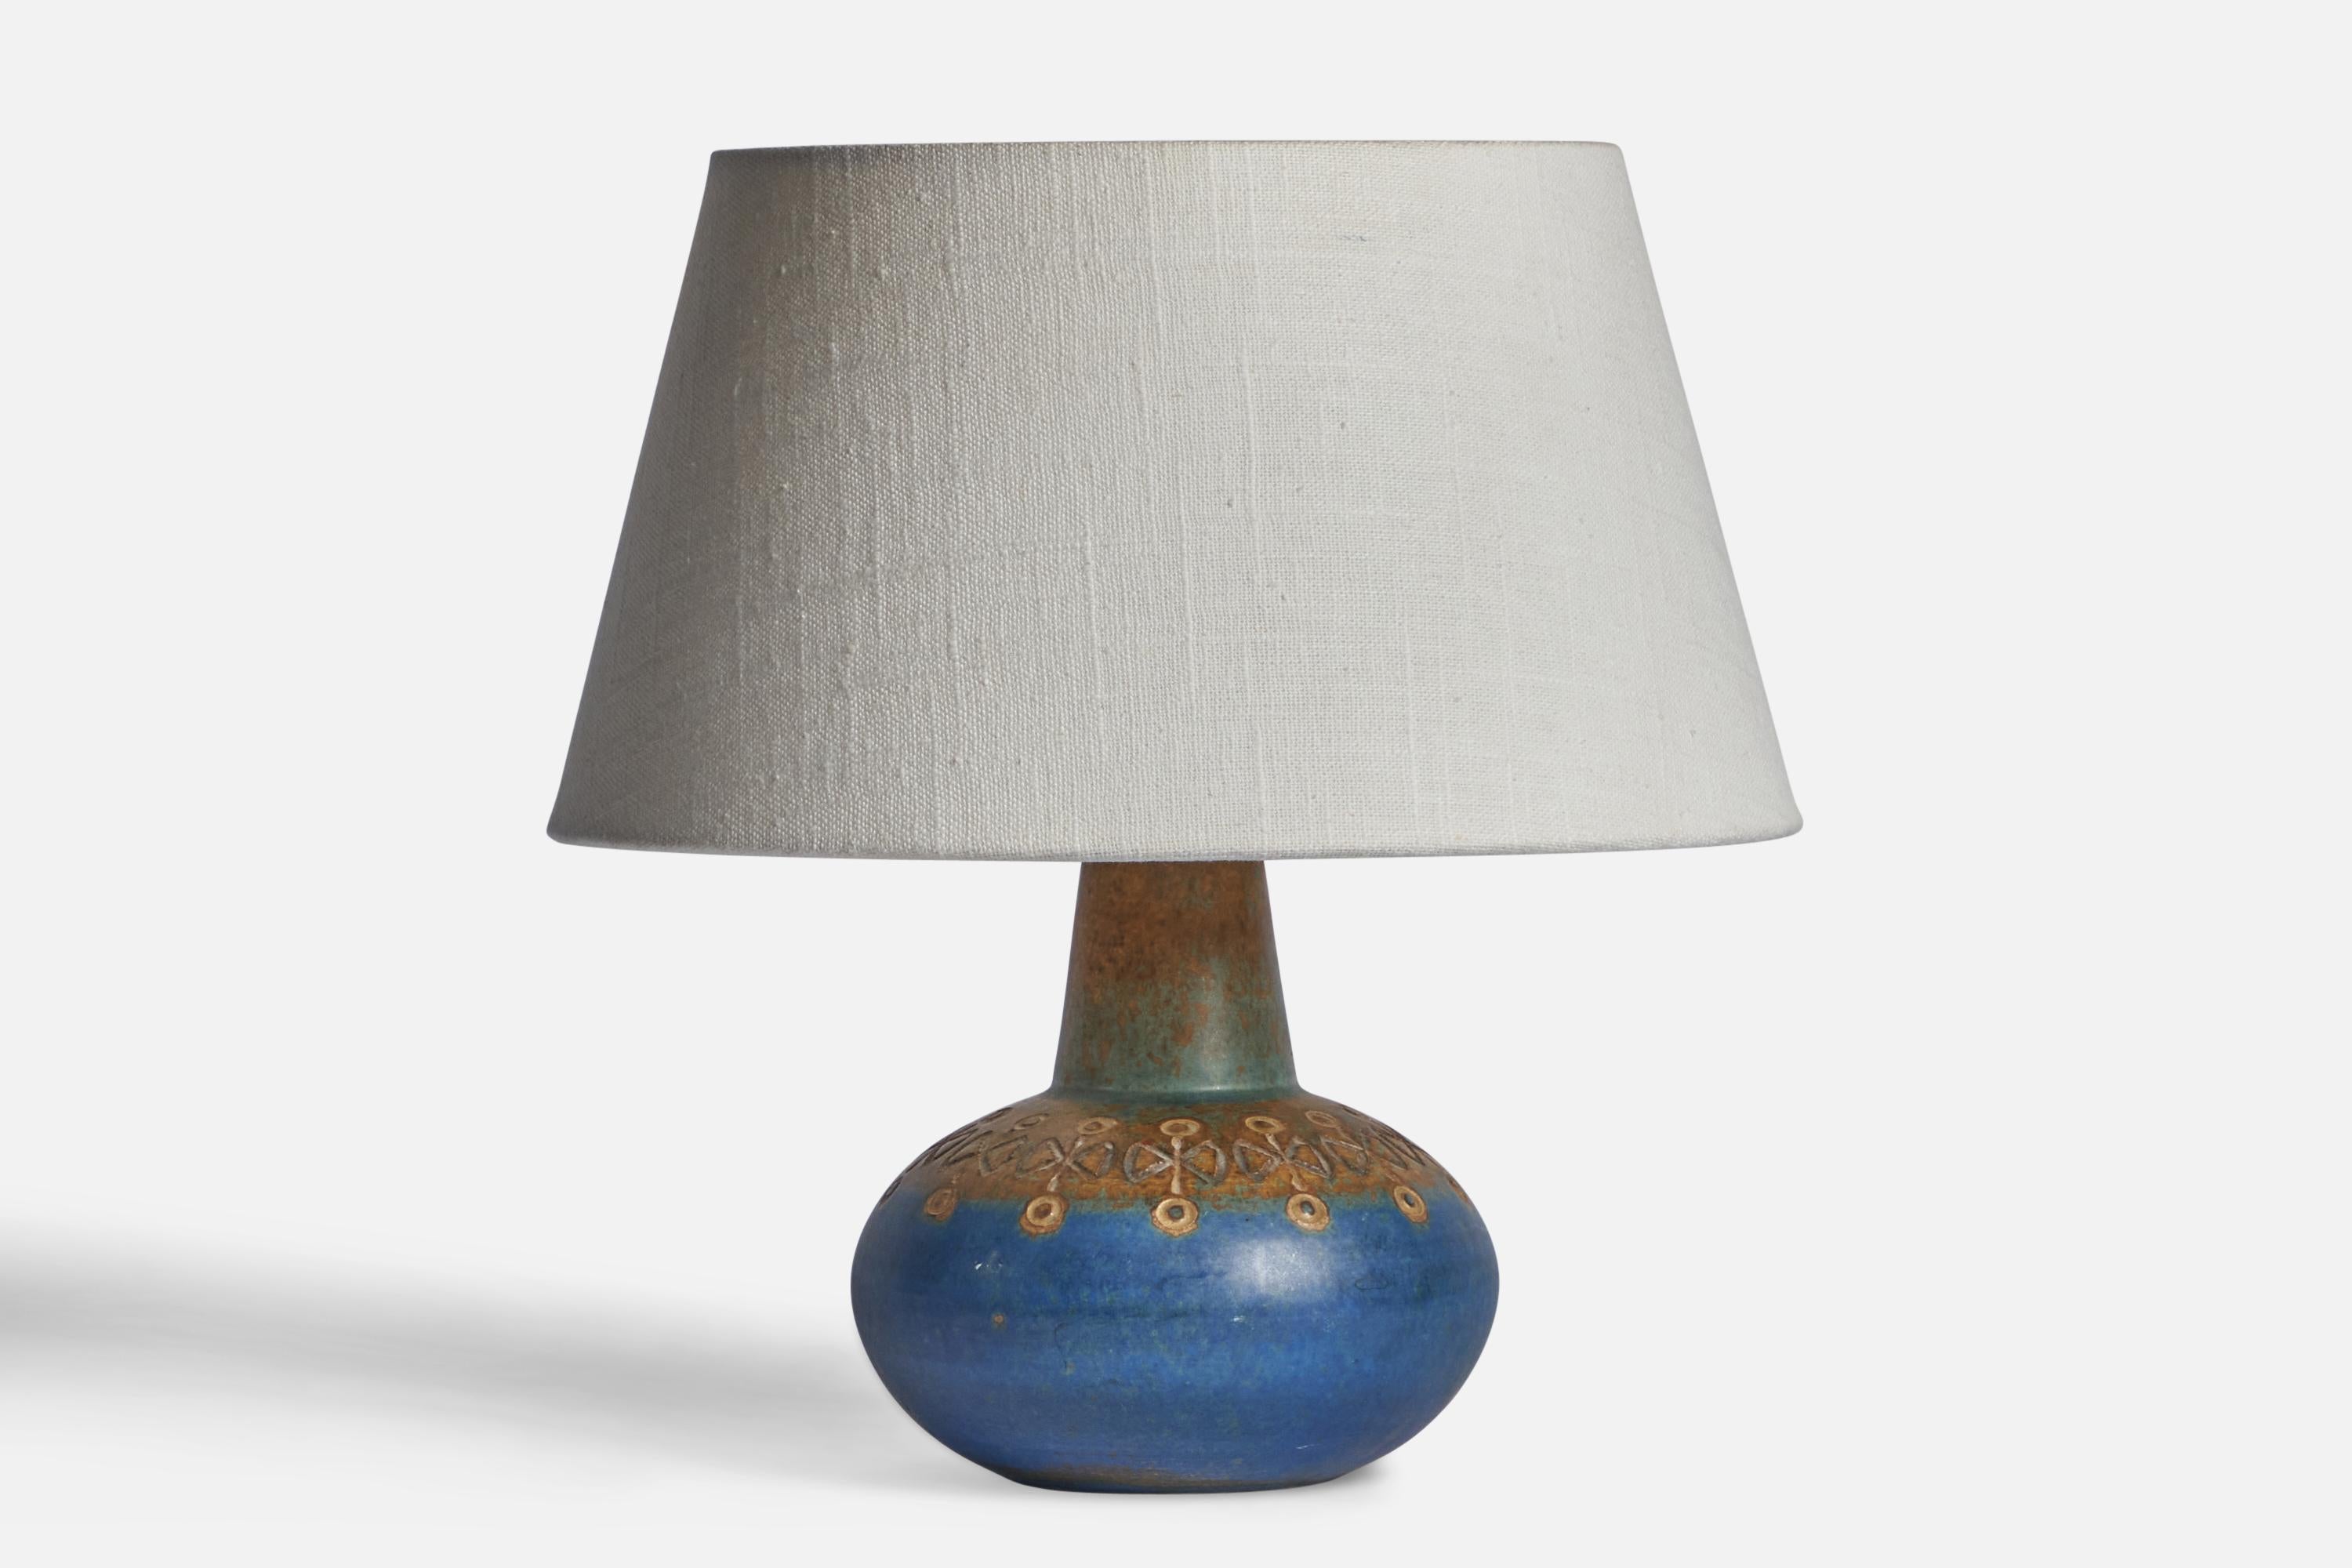 A blue and brown-glazed stoneware table lamp designed by Ulla Winbladh and produced by Alingsås Keramik, Sweden, 1960s.

Dimensions of Lamp (inches): 7.75” H x 5” Diameter
Dimensions of Shade (inches): 7” Top Diameter x 10” Bottom Diameter x